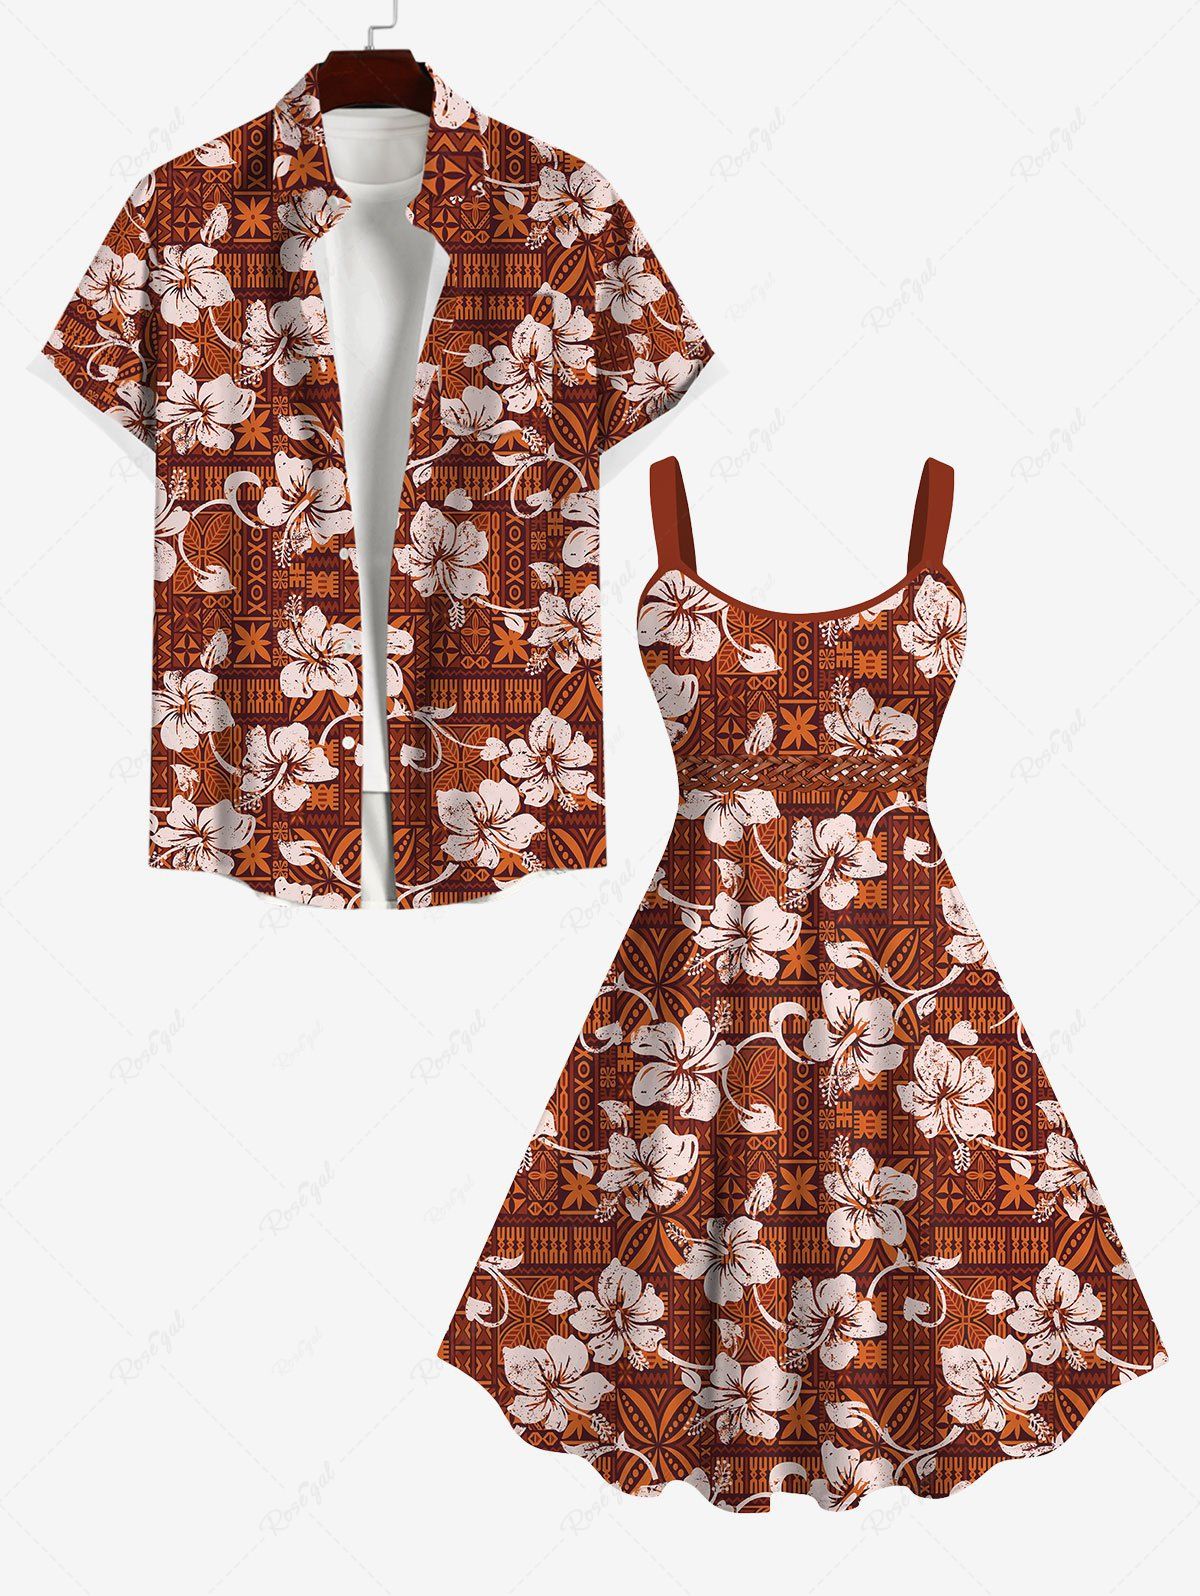 Cheap Vintage Floral Patternblock Graphic Print Backless Dress and Button Shirt Plus Size Matching Hawaii Beach Outfit for Couples  